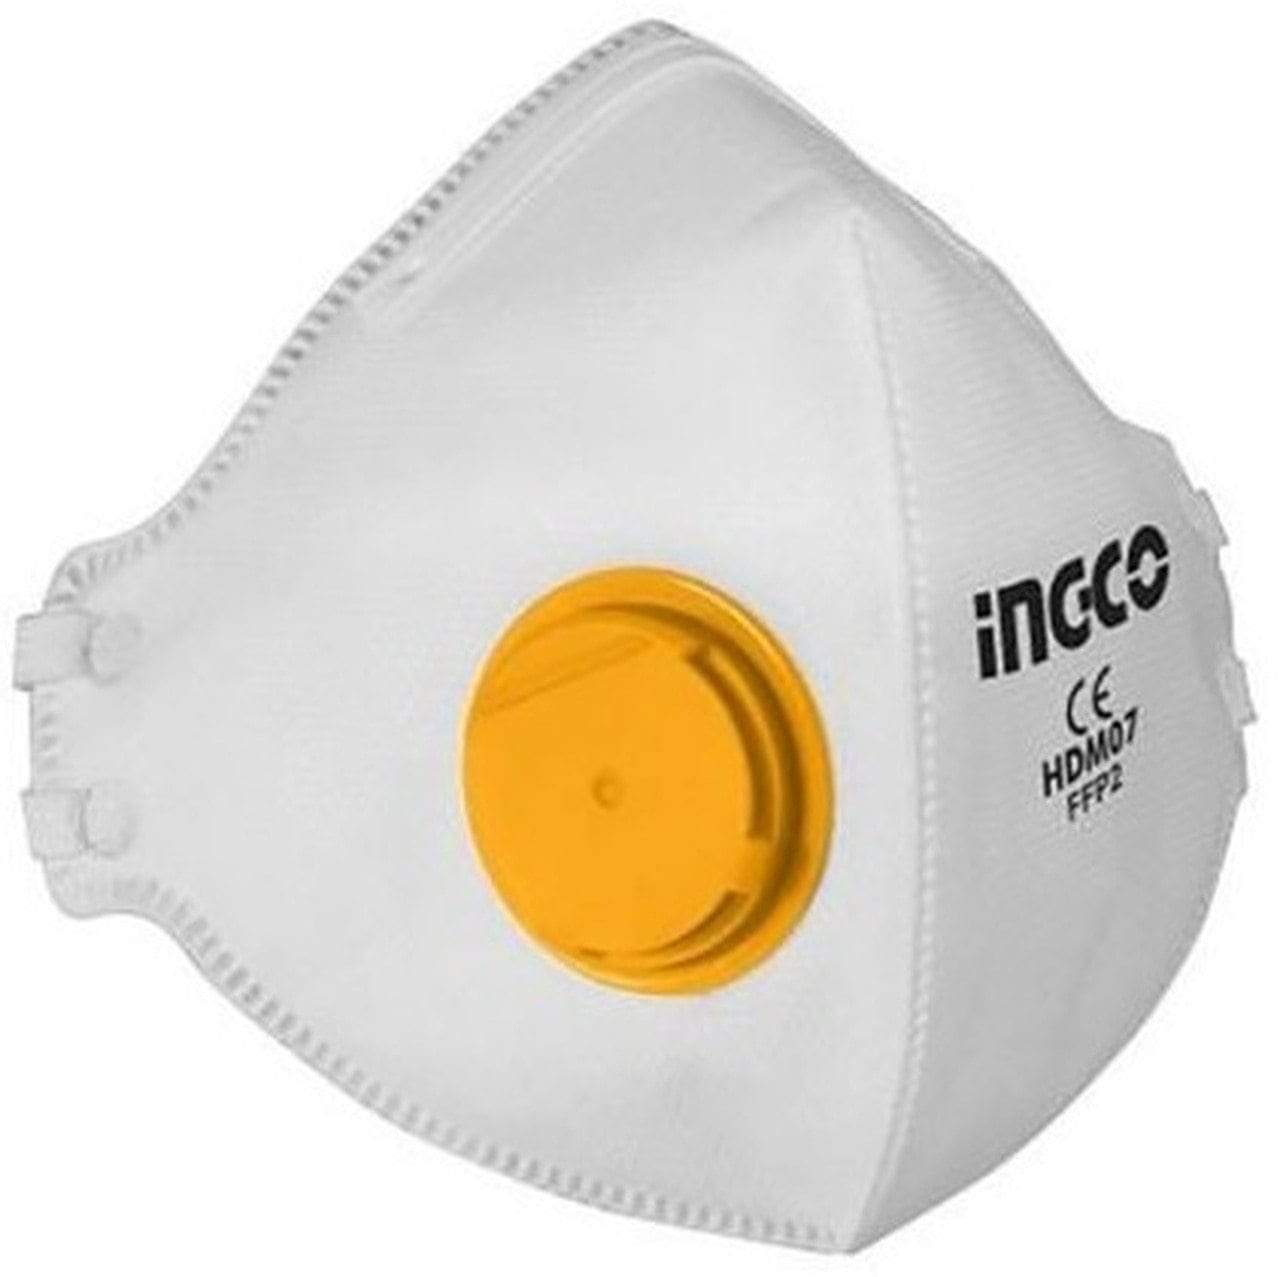 Ingco Dust Mask with Breath Valve - HDM07 | Supply Master | Accra, Ghana Tools Building Steel Engineering Hardware tool